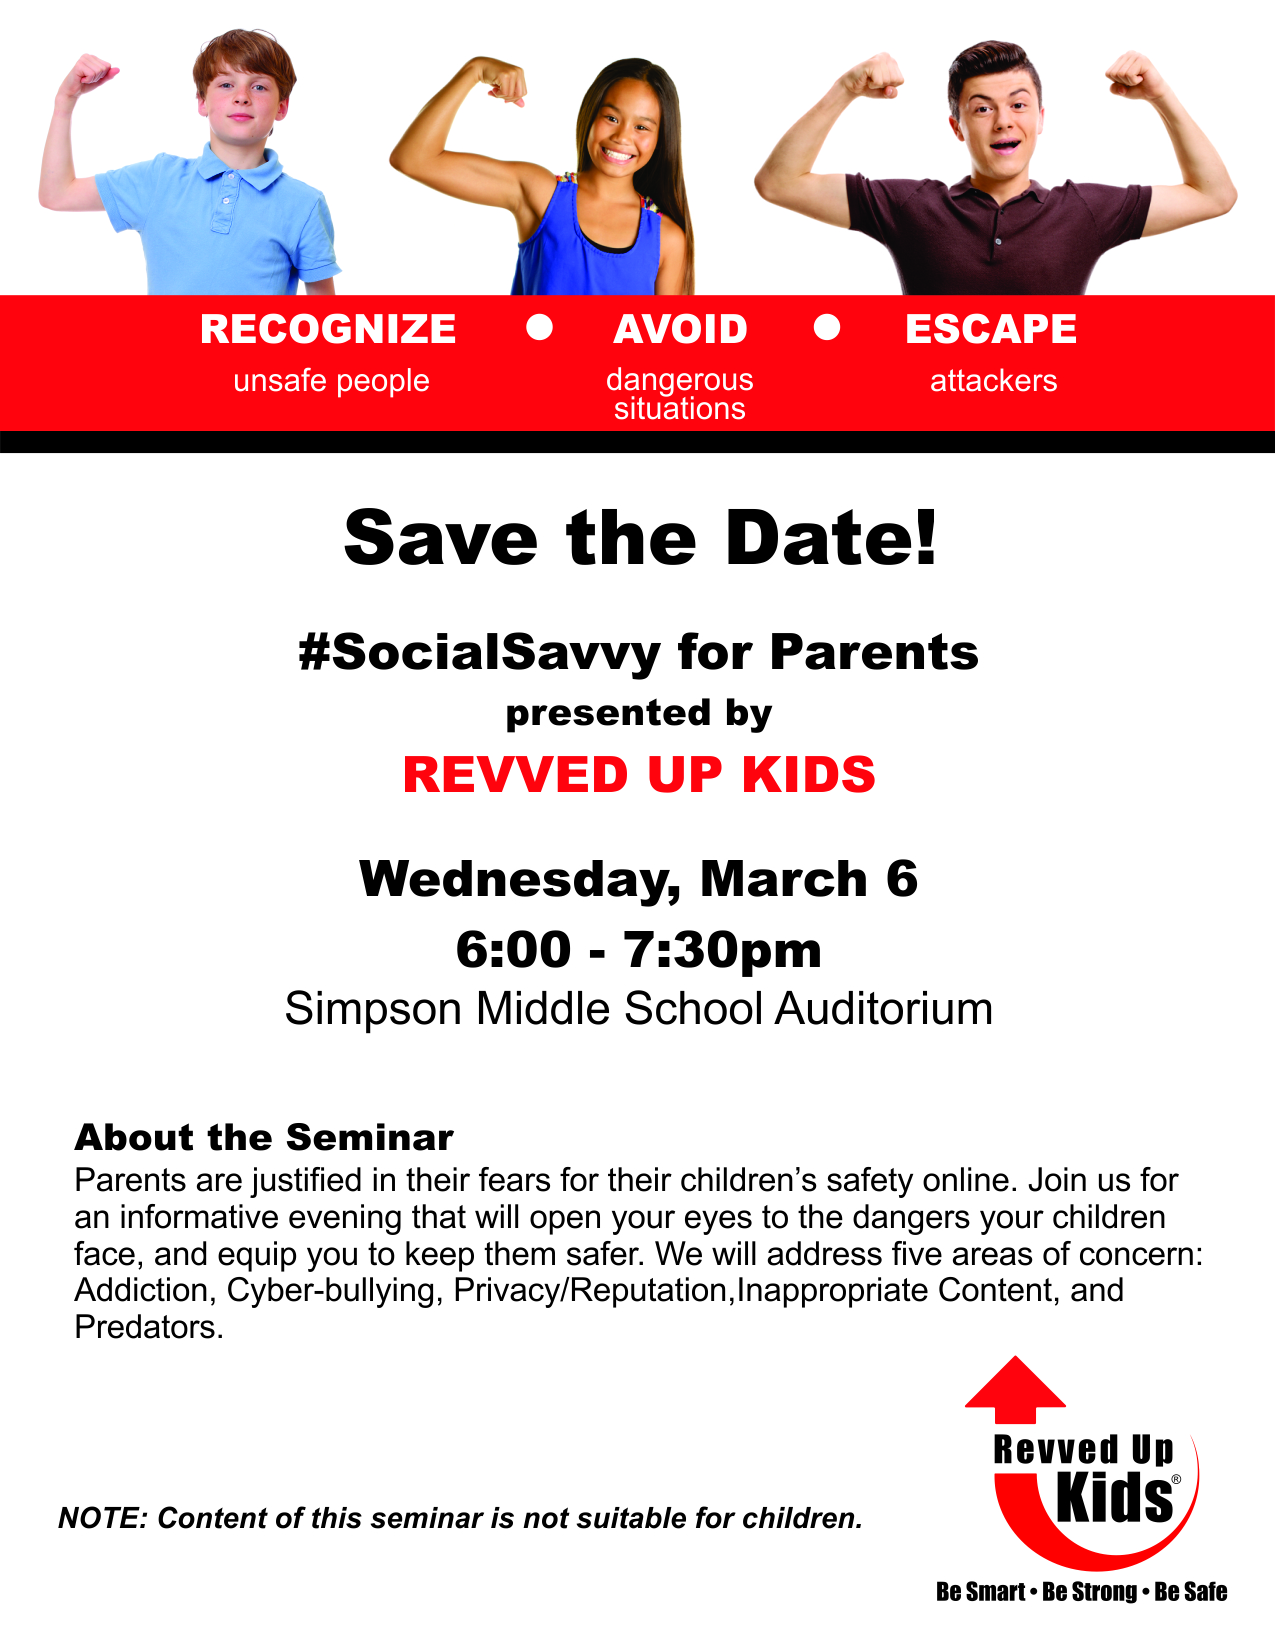 #SocialSavvy for Parents presented by REVVED UP KIDS